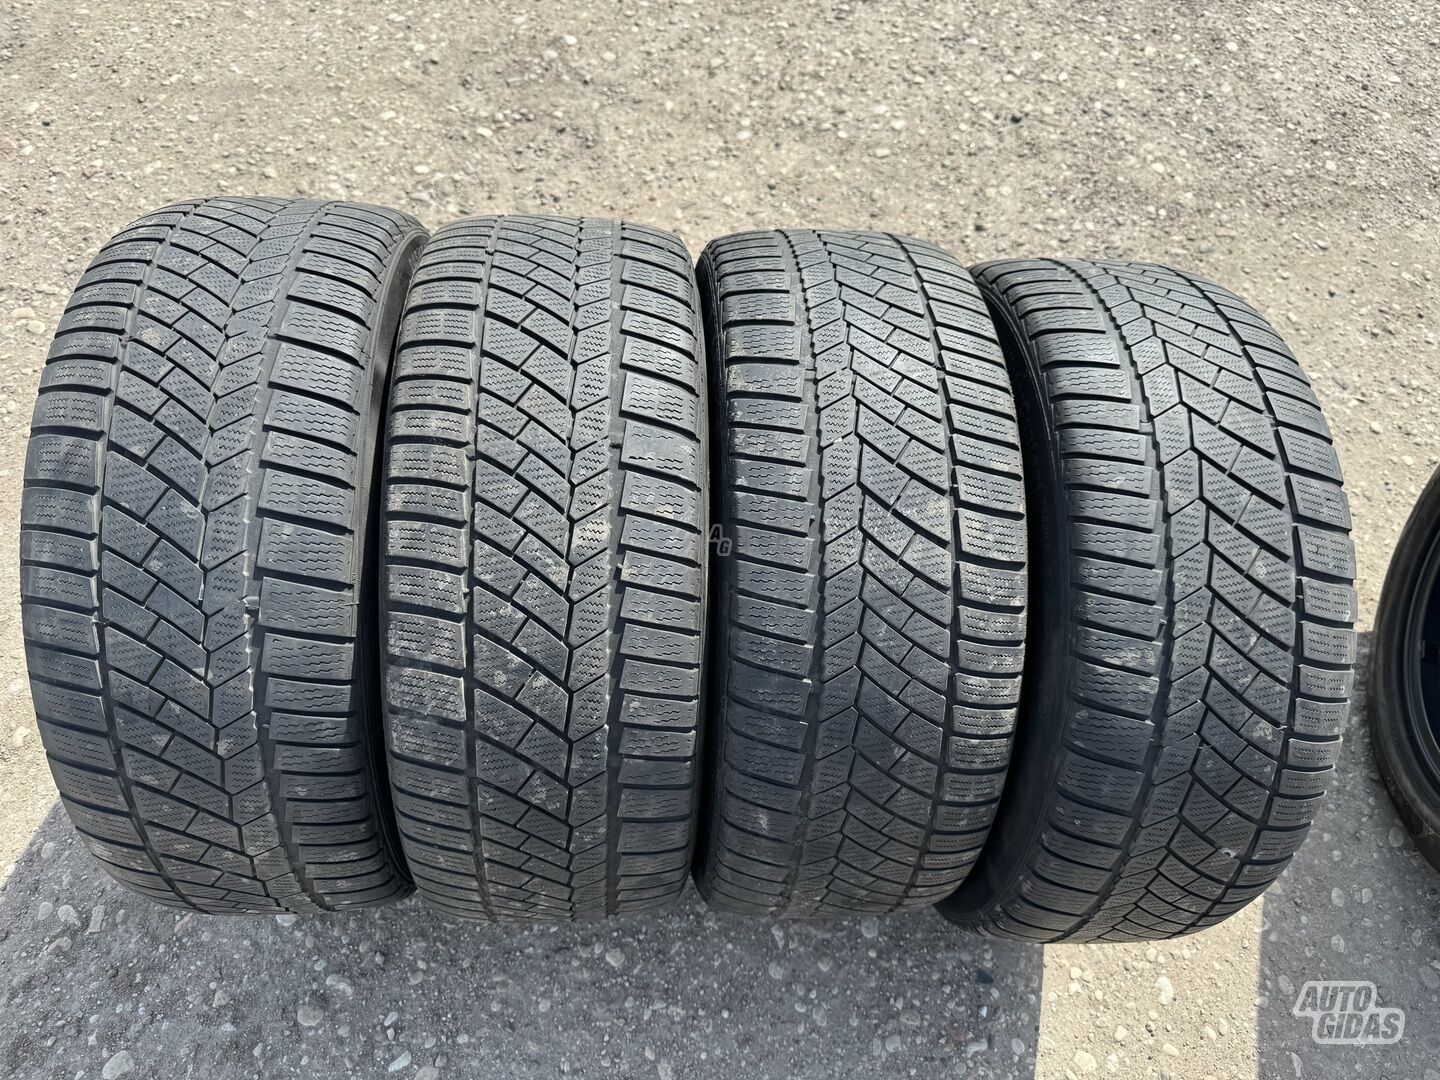 Continental Siunciam, 4-5mm R18 universal tyres passanger car